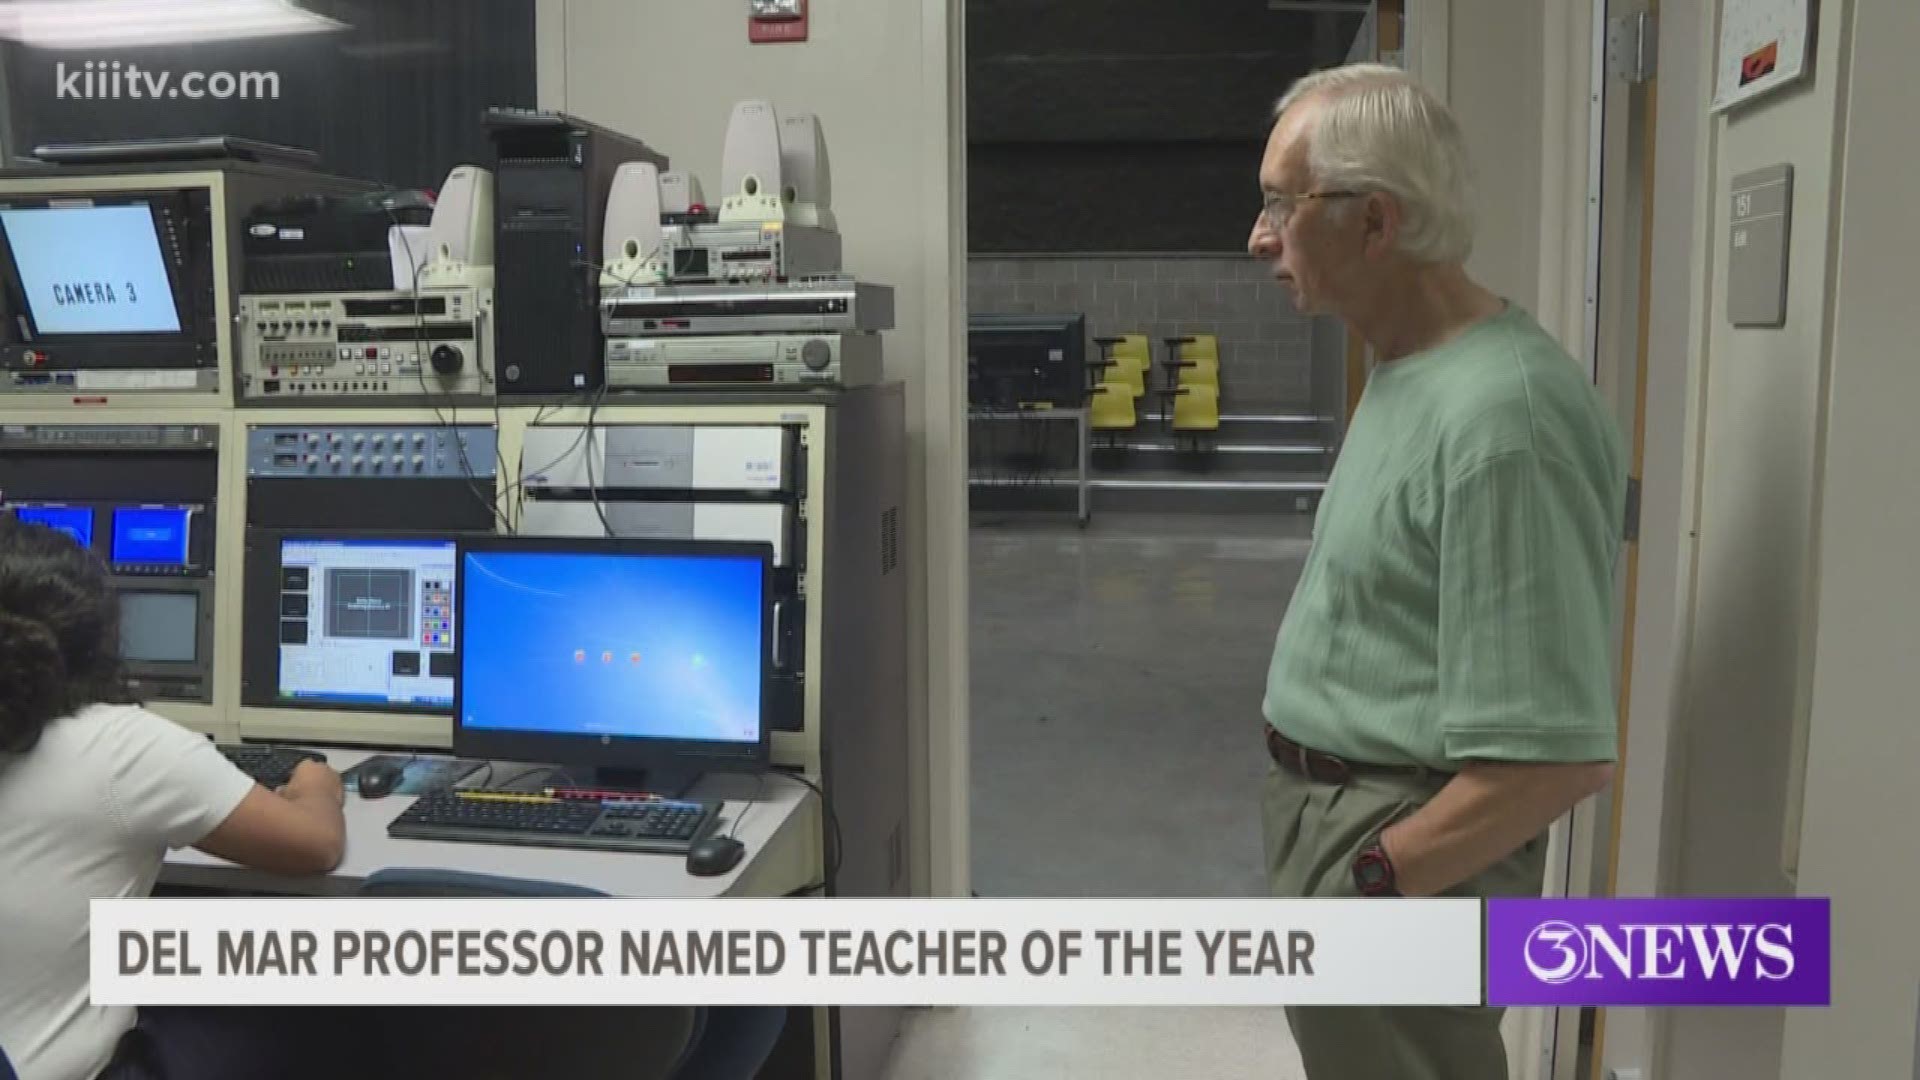 A Del Mar College professor is gaining statewide attention. Mac Aipperspach was recently named Educator of the Year by the Texas Association of Broadcasters.